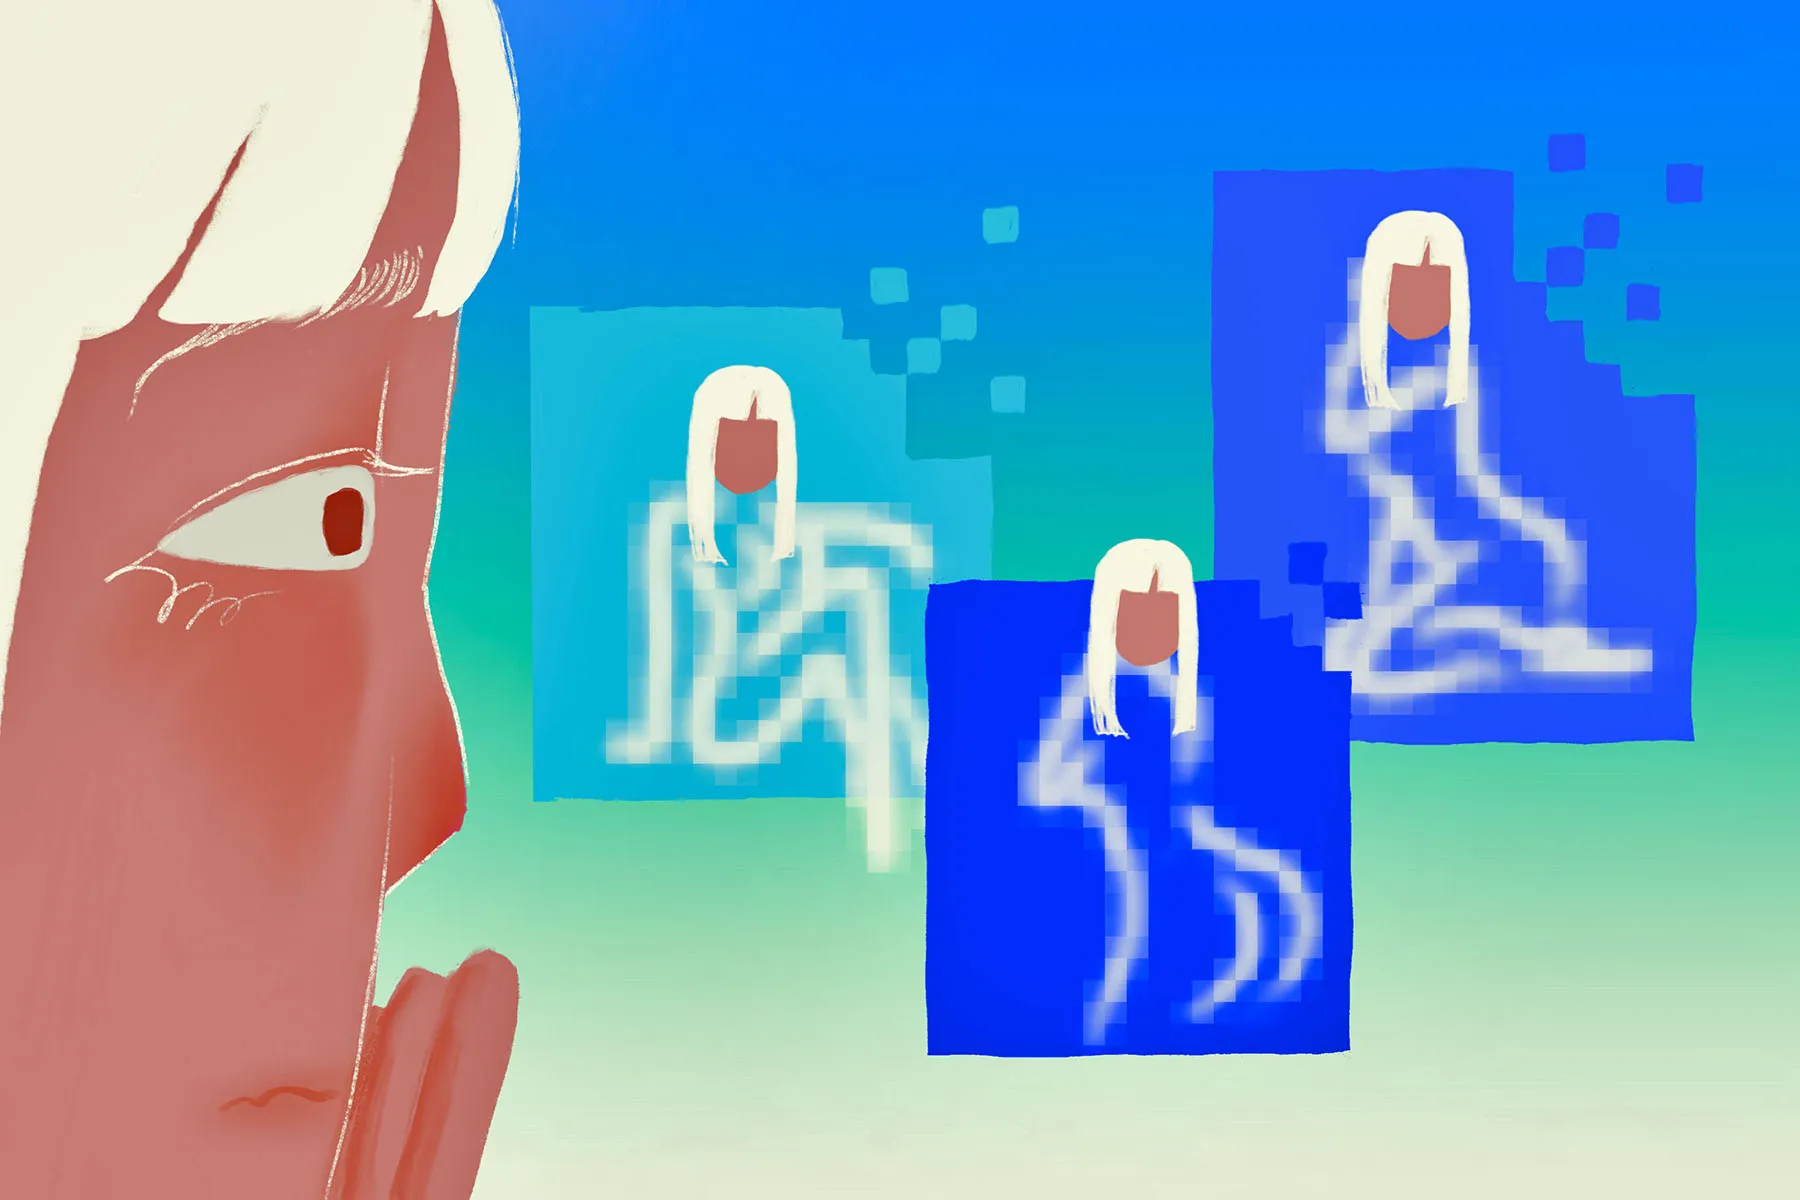 illustration of a person looking worriedly at pixelated nude images of themselves posing.